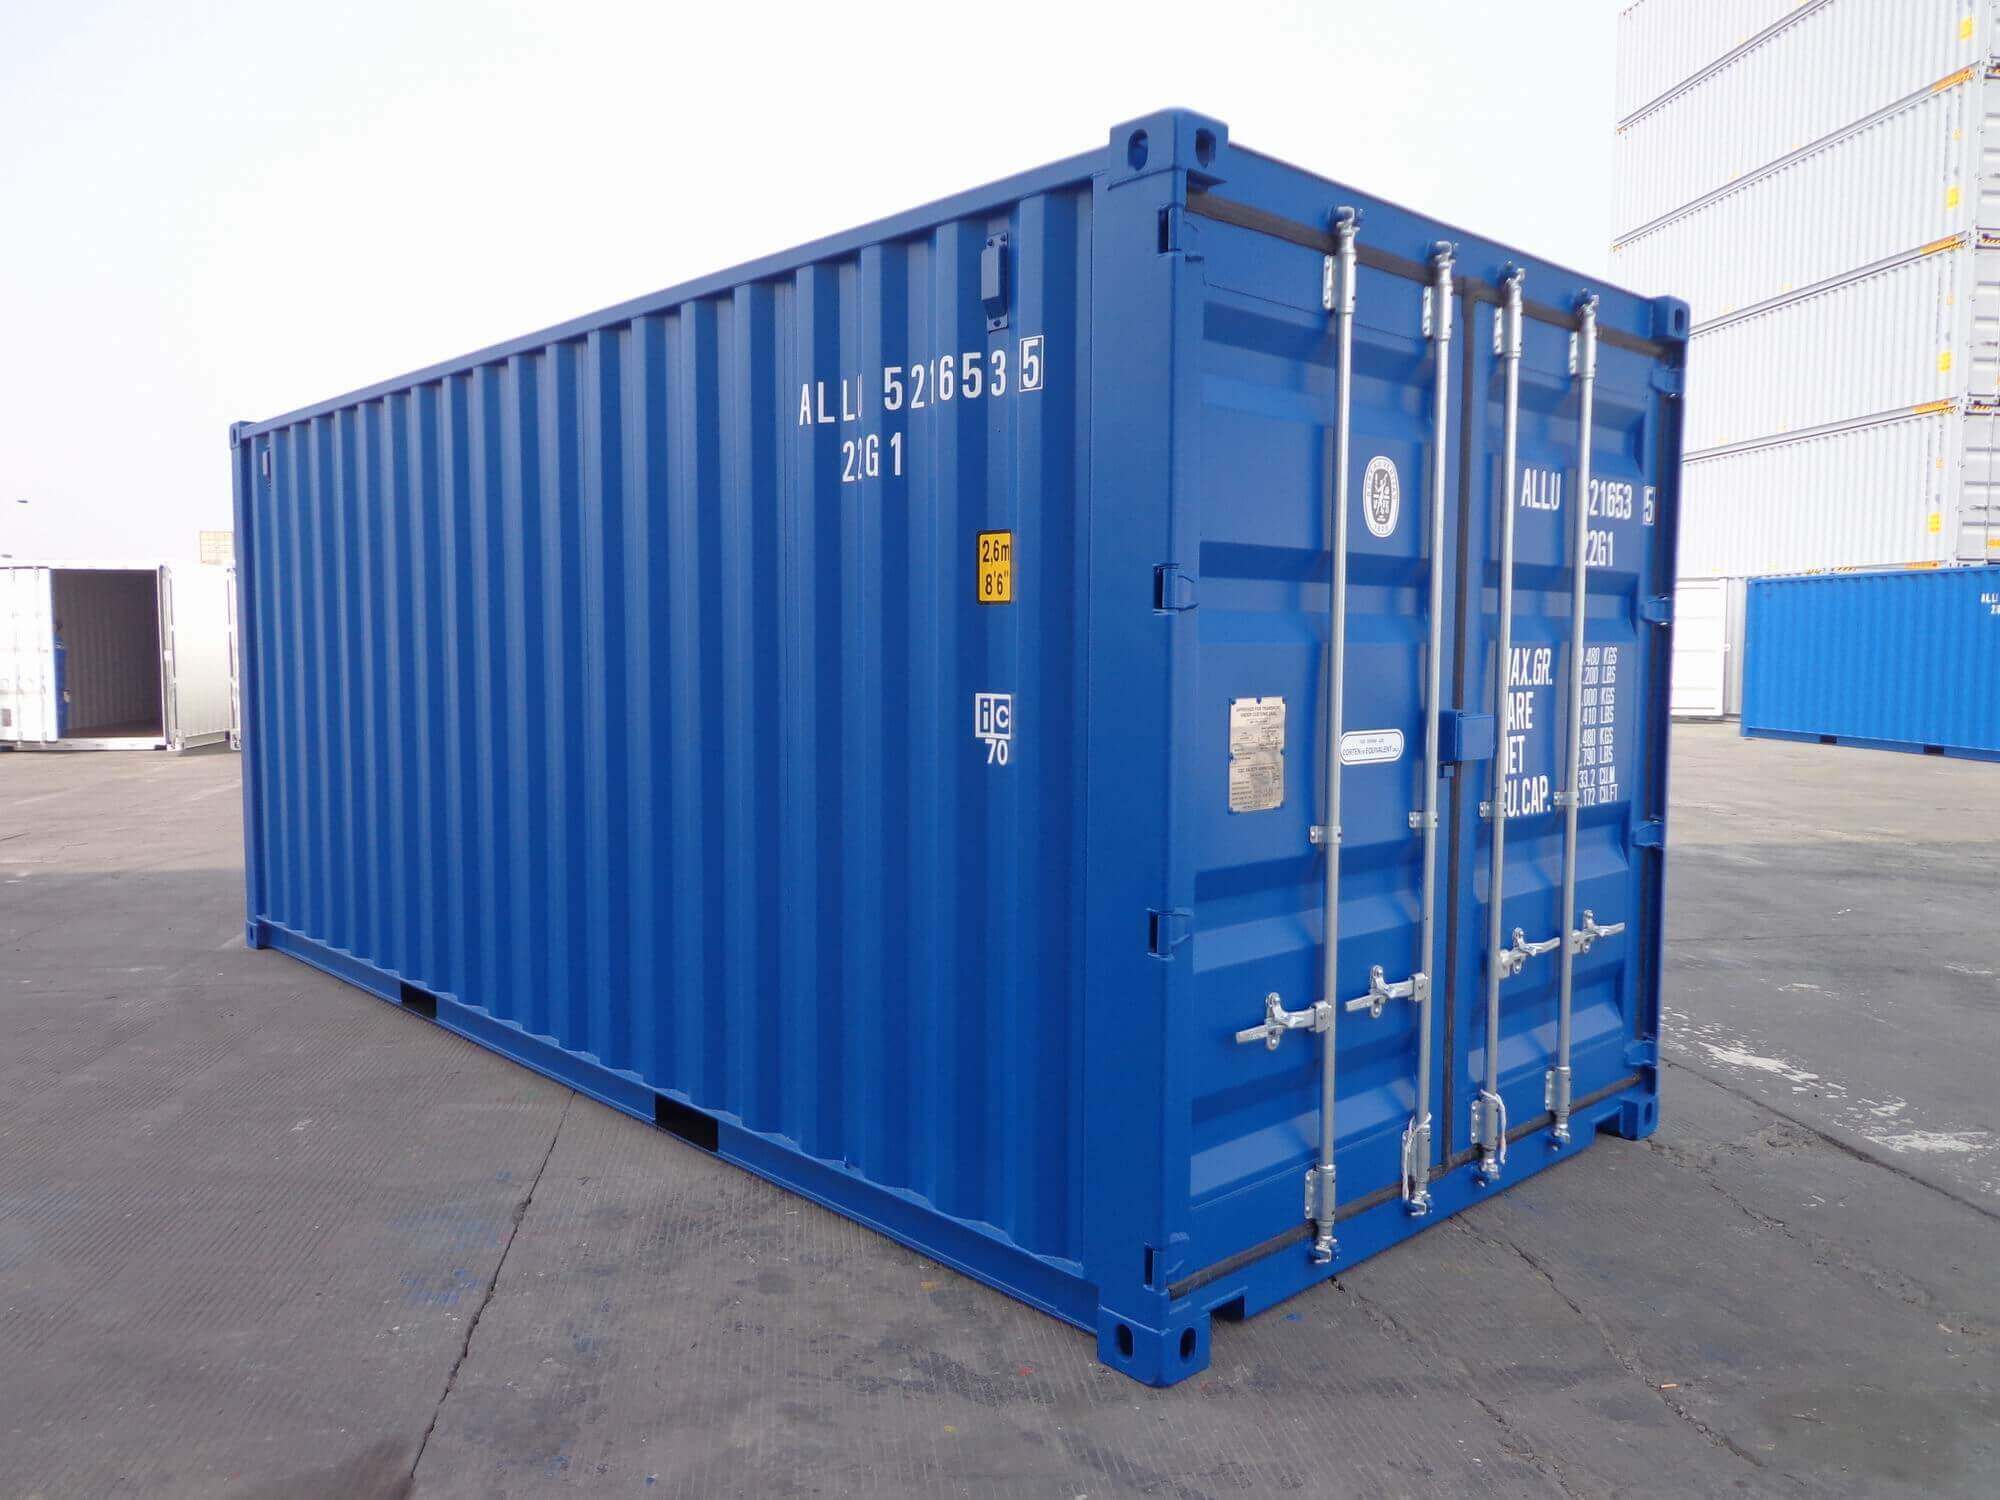 https://www.alconet-containers.com/app/uploads/2018/08/Dry-van-shipping-container.jpg